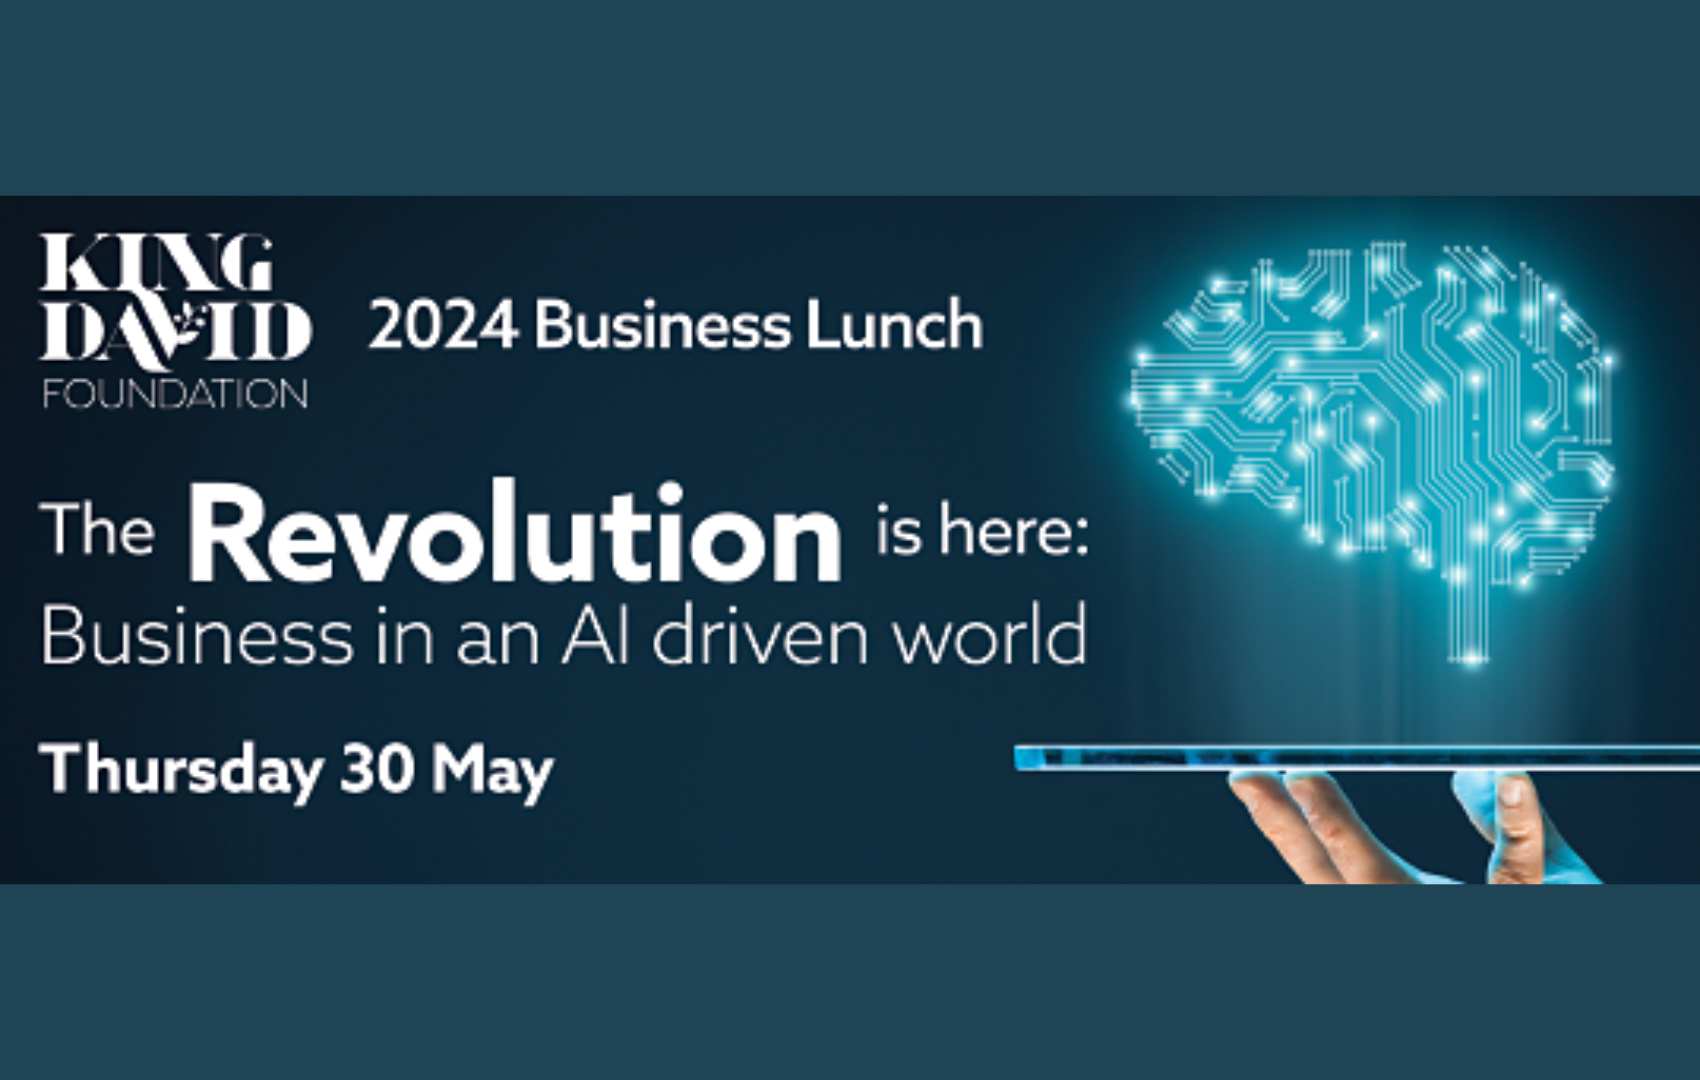 The image is of a brain containing neural paths coming out of a laptop. The King David Foundation logo is on the top left alongisde the words 2024 Business Lunch.